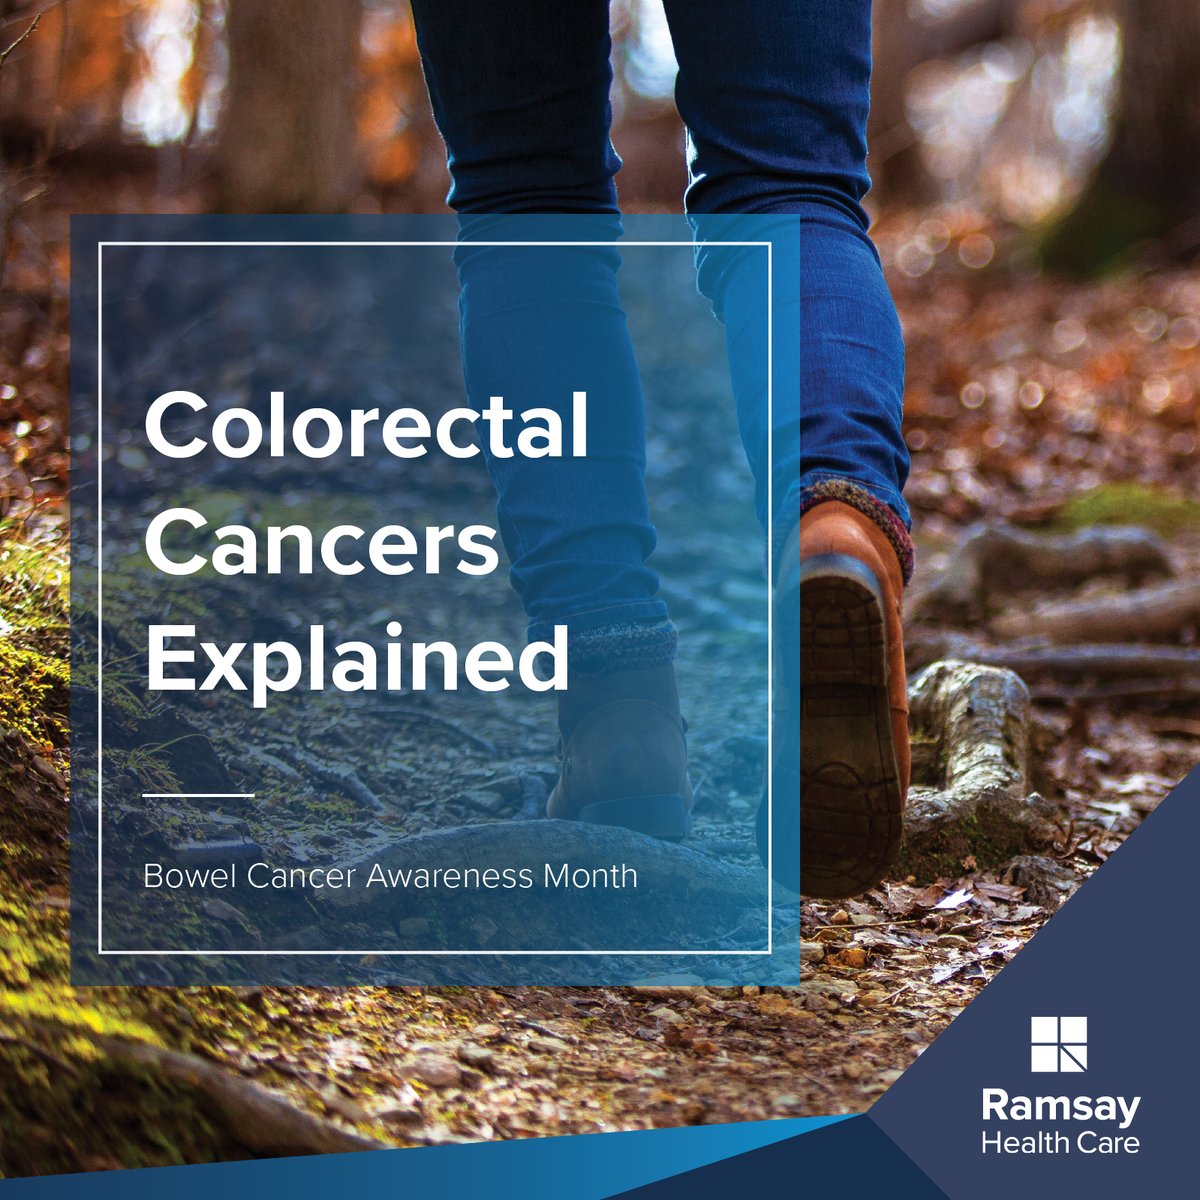 For #BowelCancerAwarenessMonth, Consultant Colorectal and General Surgeon, Mr Triantafyllos Doulias explains the differences between colorectal cancers, symptoms, screening, and curability. Read the full blog here: ramsayhealth.co.uk/blog/cancer-ca…